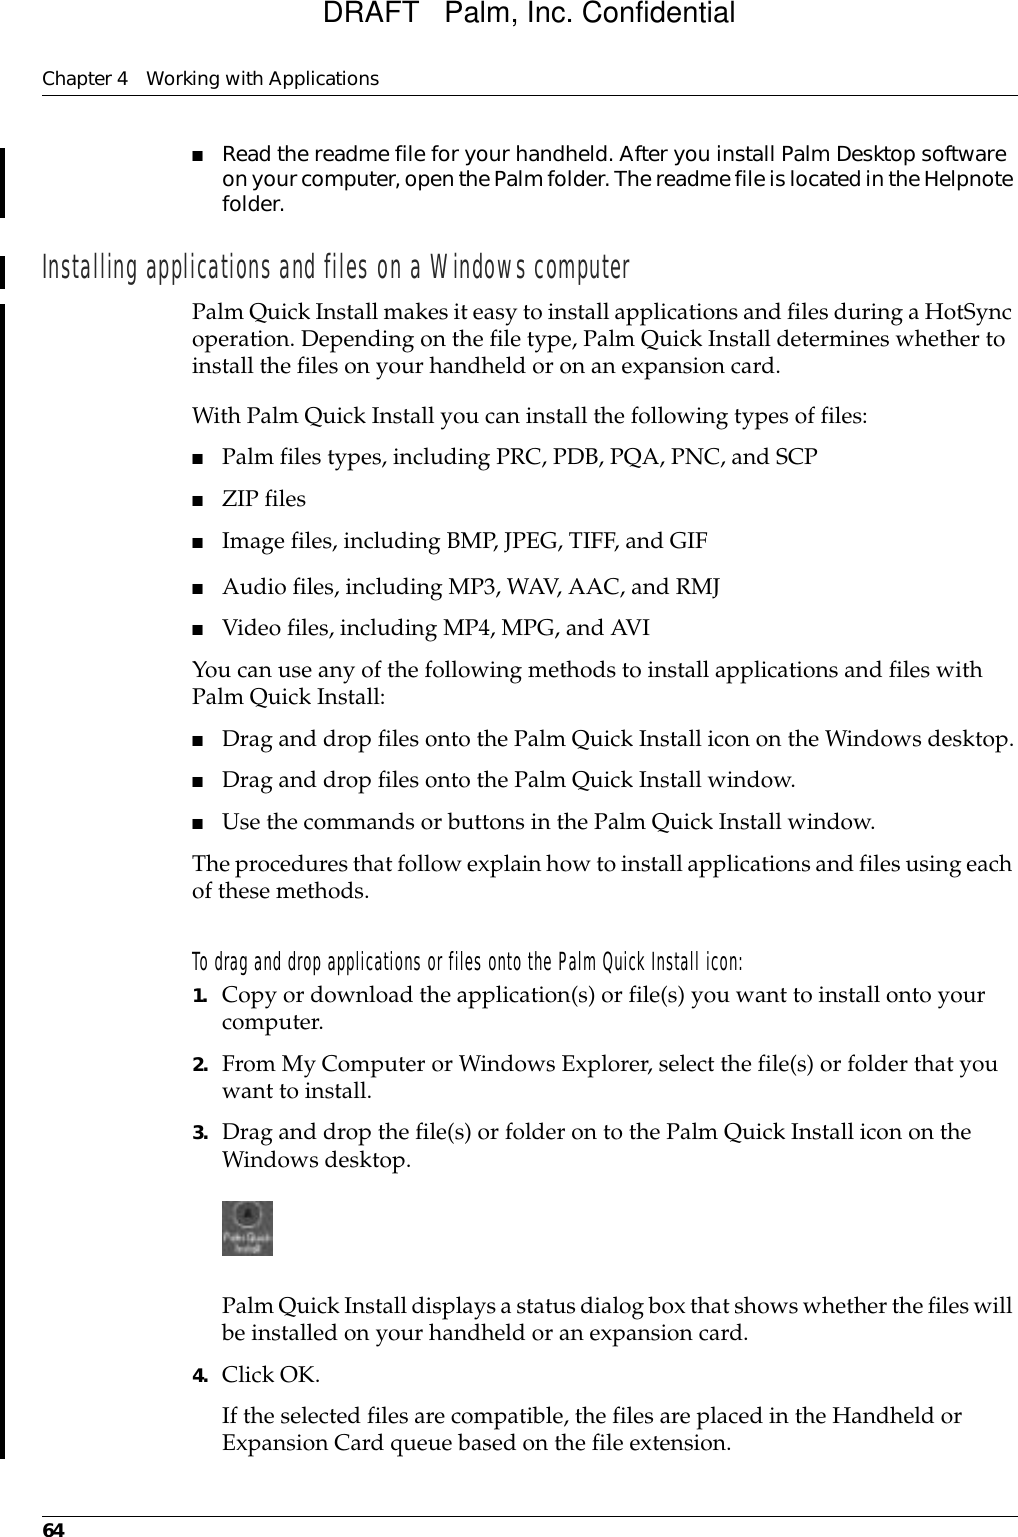 Chapter 4 Working with Applications64■Read the readme file for your handheld. After you install Palm Desktop software on your computer, open the Palm folder. The readme file is located in the Helpnote folder.Installing applications and files on a Windows computerPalm Quick Install makes it easy to install applications and files during a HotSync operation. Depending on the file type, Palm Quick Install determines whether to install the files on your handheld or on an expansion card. With Palm Quick Install you can install the following types of files:■Palm files types, including PRC, PDB, PQA, PNC, and SCP■ZIP files■Image files, including BMP, JPEG, TIFF, and GIF■Audio files, including MP3, WAV, AAC, and RMJ■Video files, including MP4, MPG, and AVIYou can use any of the following methods to install applications and files with Palm Quick Install:■Drag and drop files onto the Palm Quick Install icon on the Windows desktop.■Drag and drop files onto the Palm Quick Install window.■Use the commands or buttons in the Palm Quick Install window.The procedures that follow explain how to install applications and files using each of these methods.To drag and drop applications or files onto the Palm Quick Install icon:1. Copy or download the application(s) or file(s) you want to install onto your computer.2. From My Computer or Windows Explorer, select the file(s) or folder that you want to install.3. Drag and drop the file(s) or folder on to the Palm Quick Install icon on the Windows desktop.Palm Quick Install displays a status dialog box that shows whether the files will be installed on your handheld or an expansion card. 4. Click OK.If the selected files are compatible, the files are placed in the Handheld or Expansion Card queue based on the file extension. DRAFT   Palm, Inc. Confidential